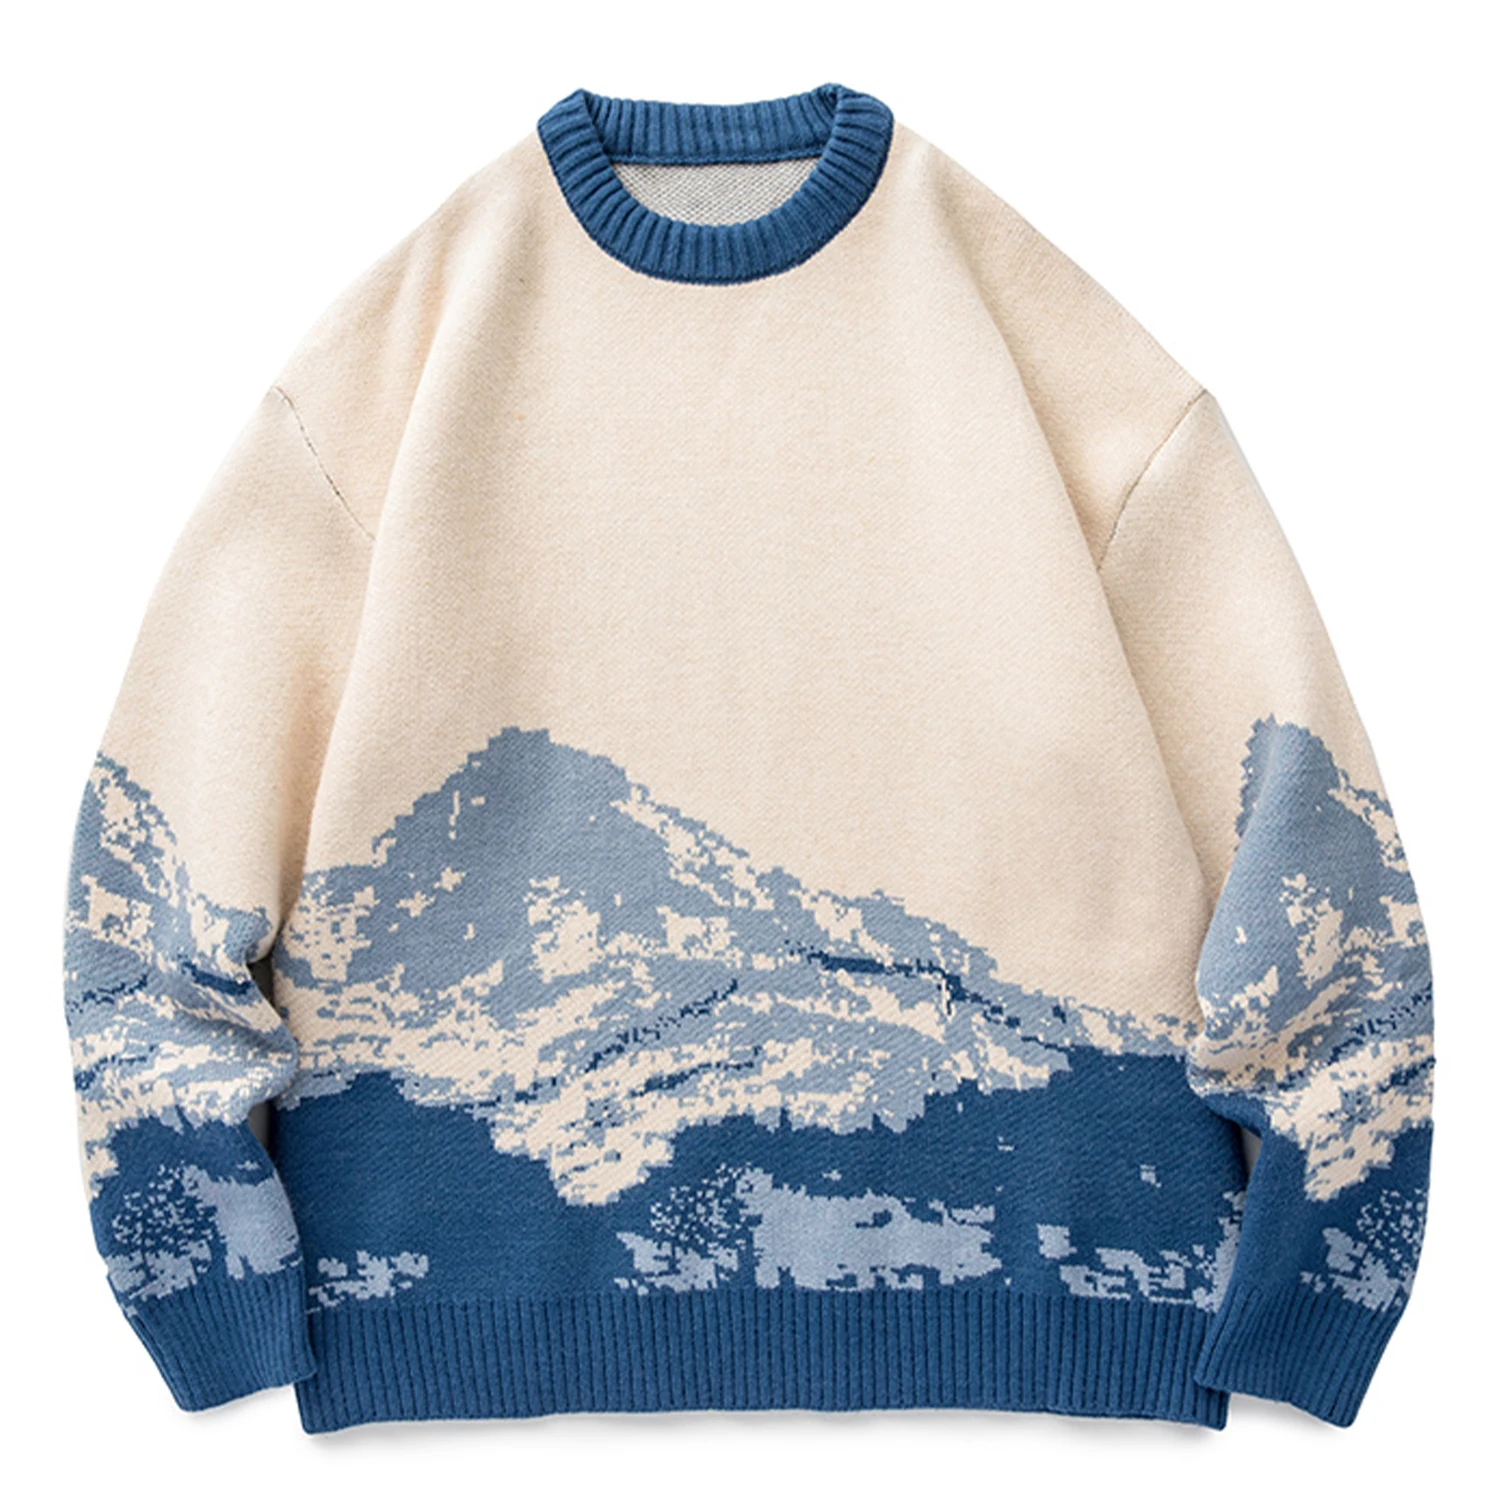 

LACIBLE Harajuku Snow Mountain Sweater Gradient Embroidered Knitted Streetwear Knitted Sweater Hip Hop Streetwear Retro Style